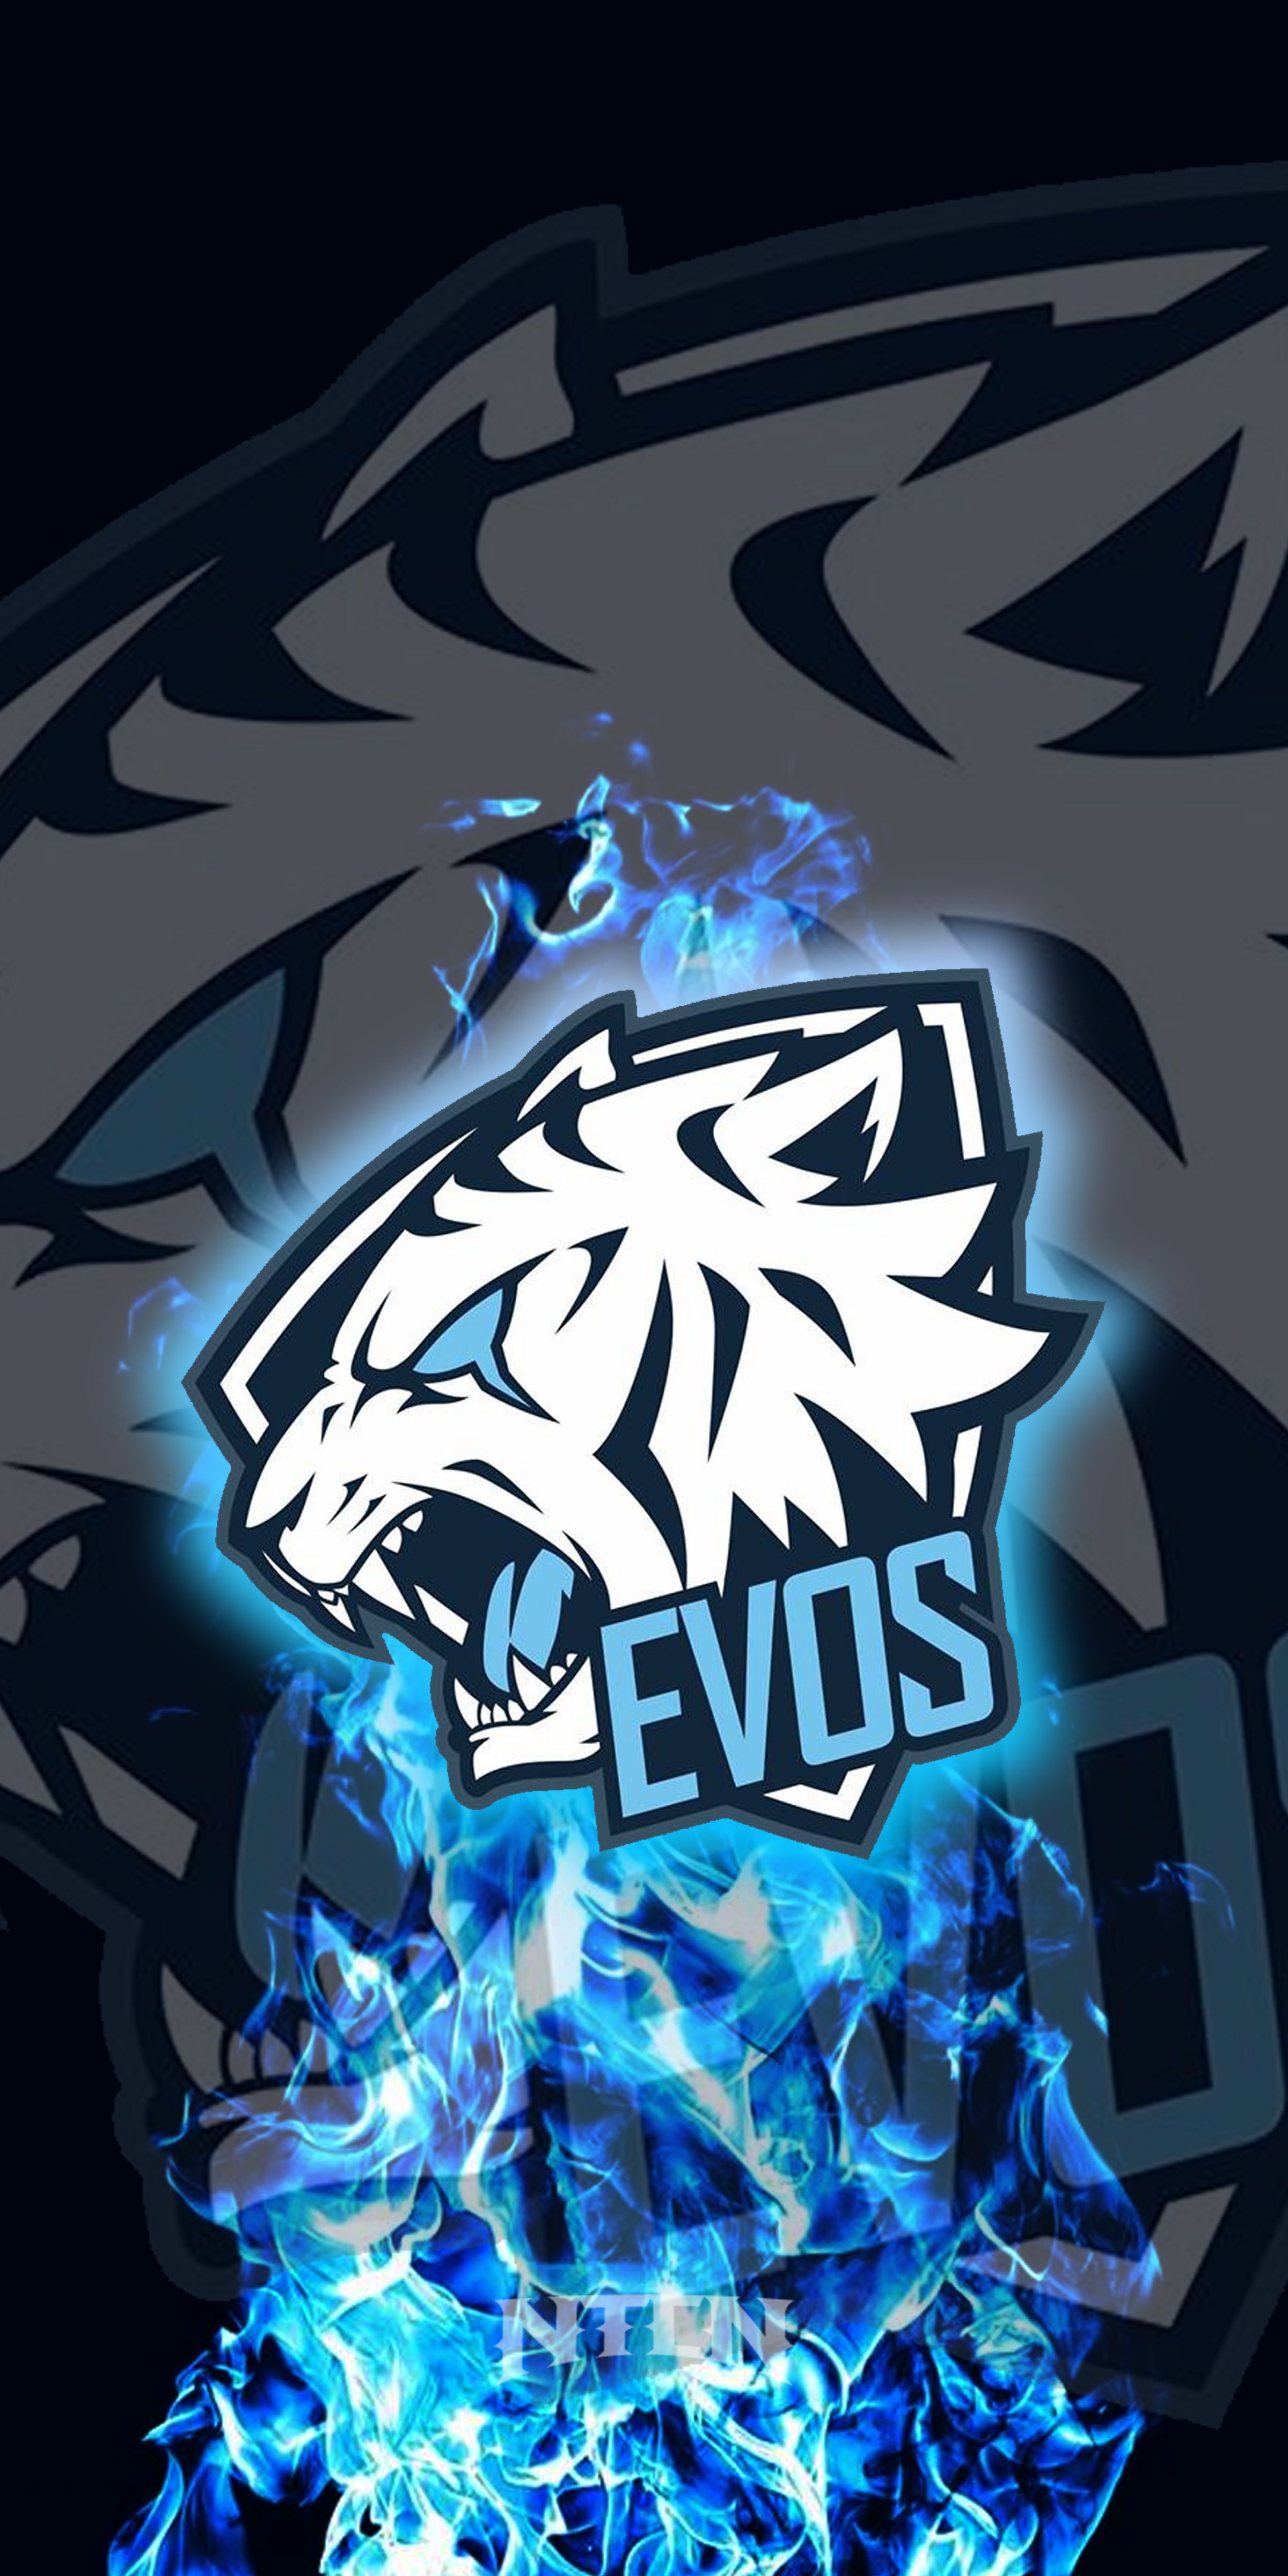 Logo Gamers Evos Wallpapers Smartphone, Wallpapers Mobile